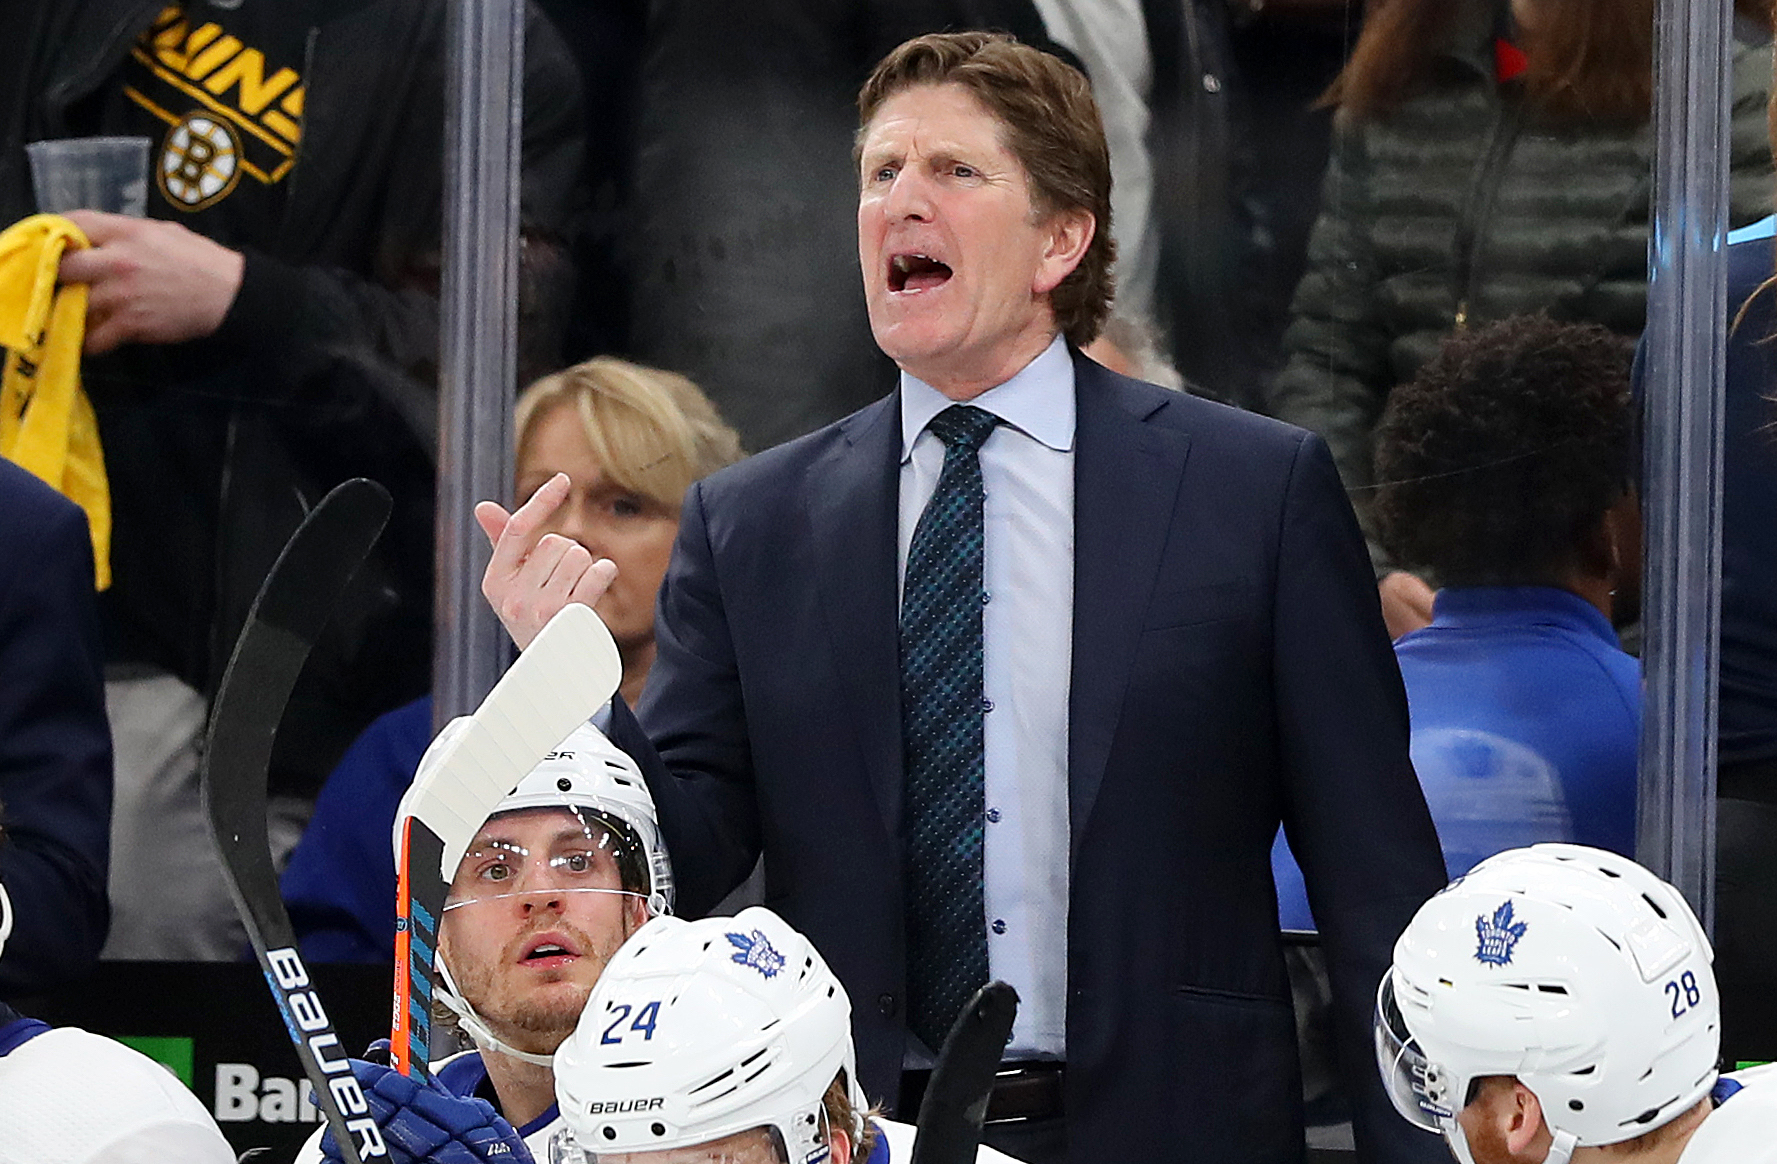 Former head coach of the Toronto Maple Leafs, Mike Babcock, yells at referees or his own players